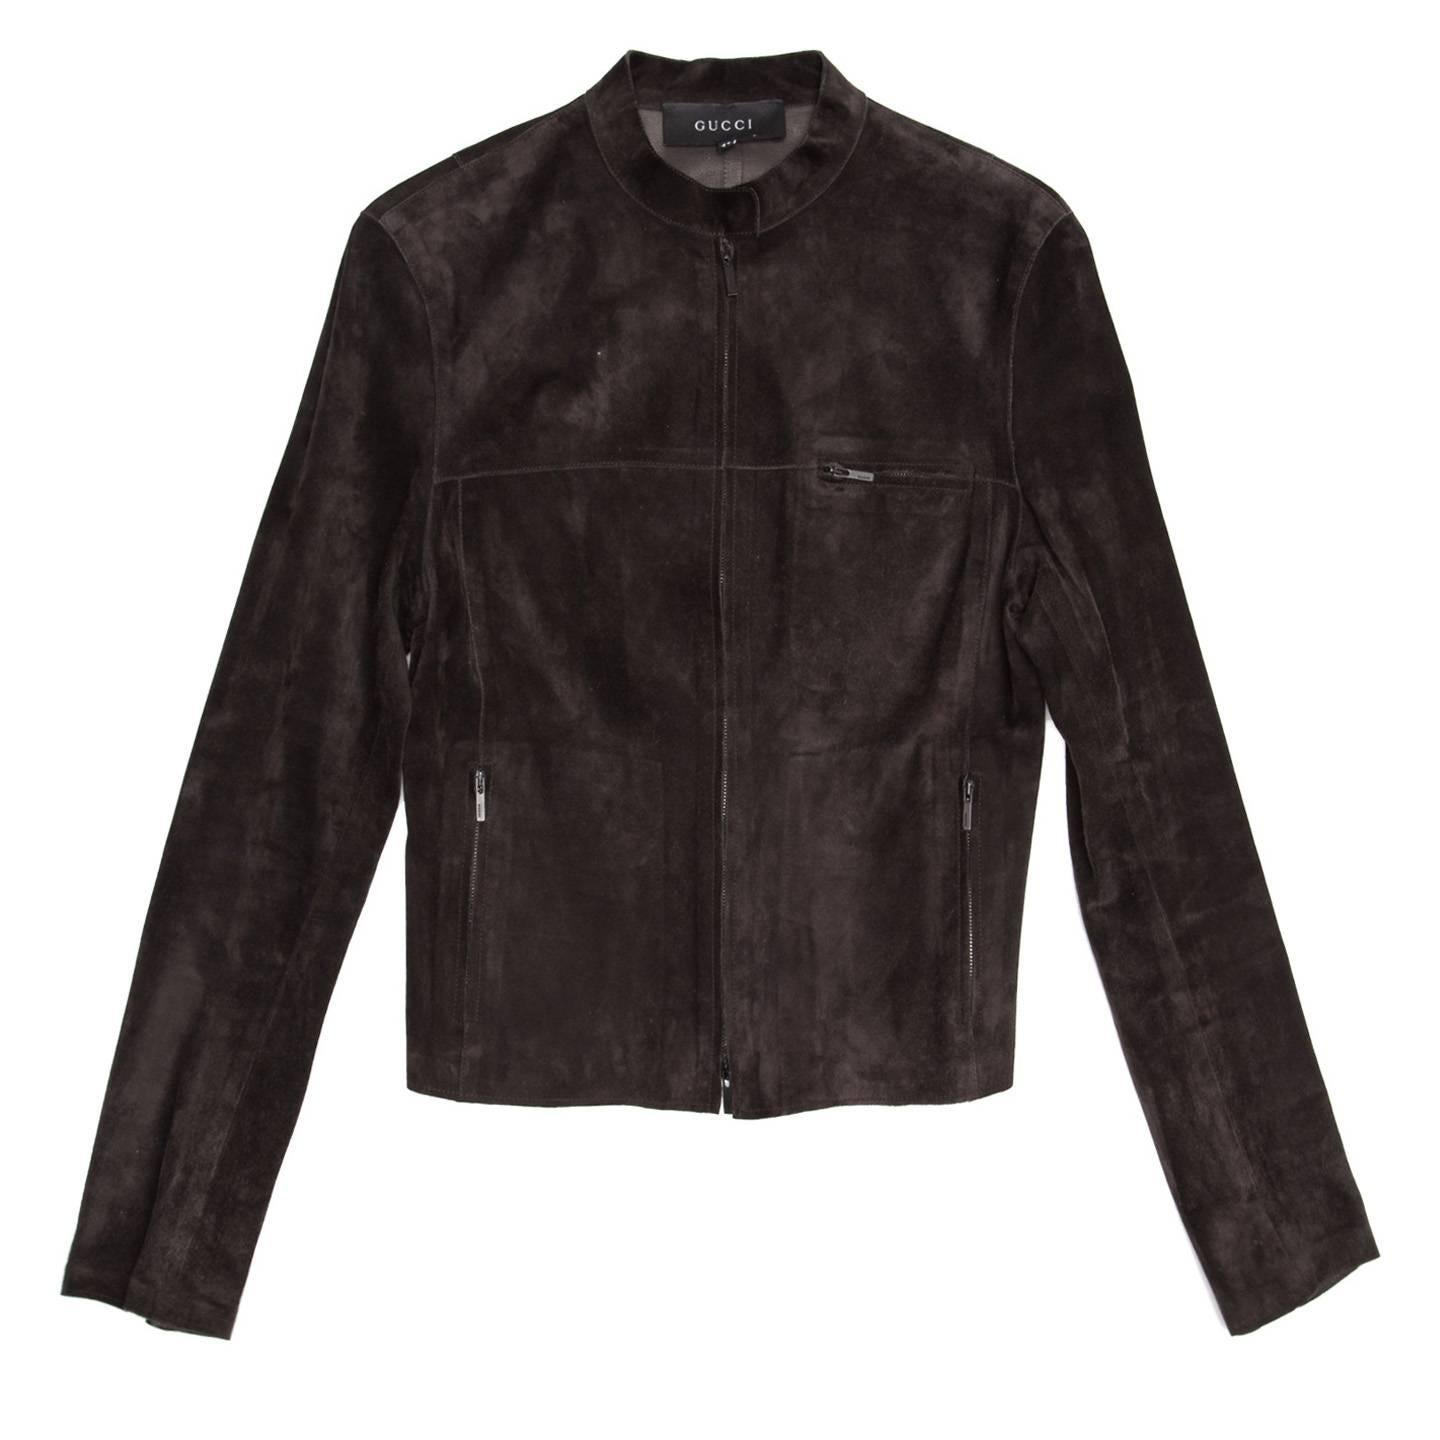 Chocolate brown suede cropped jacket with open ended metal zipper at center front and standing collar that fastens with a dark metal snap button. More metal zippers enrich the pockets at waist, the breast pocket, the cuffs openings and the back